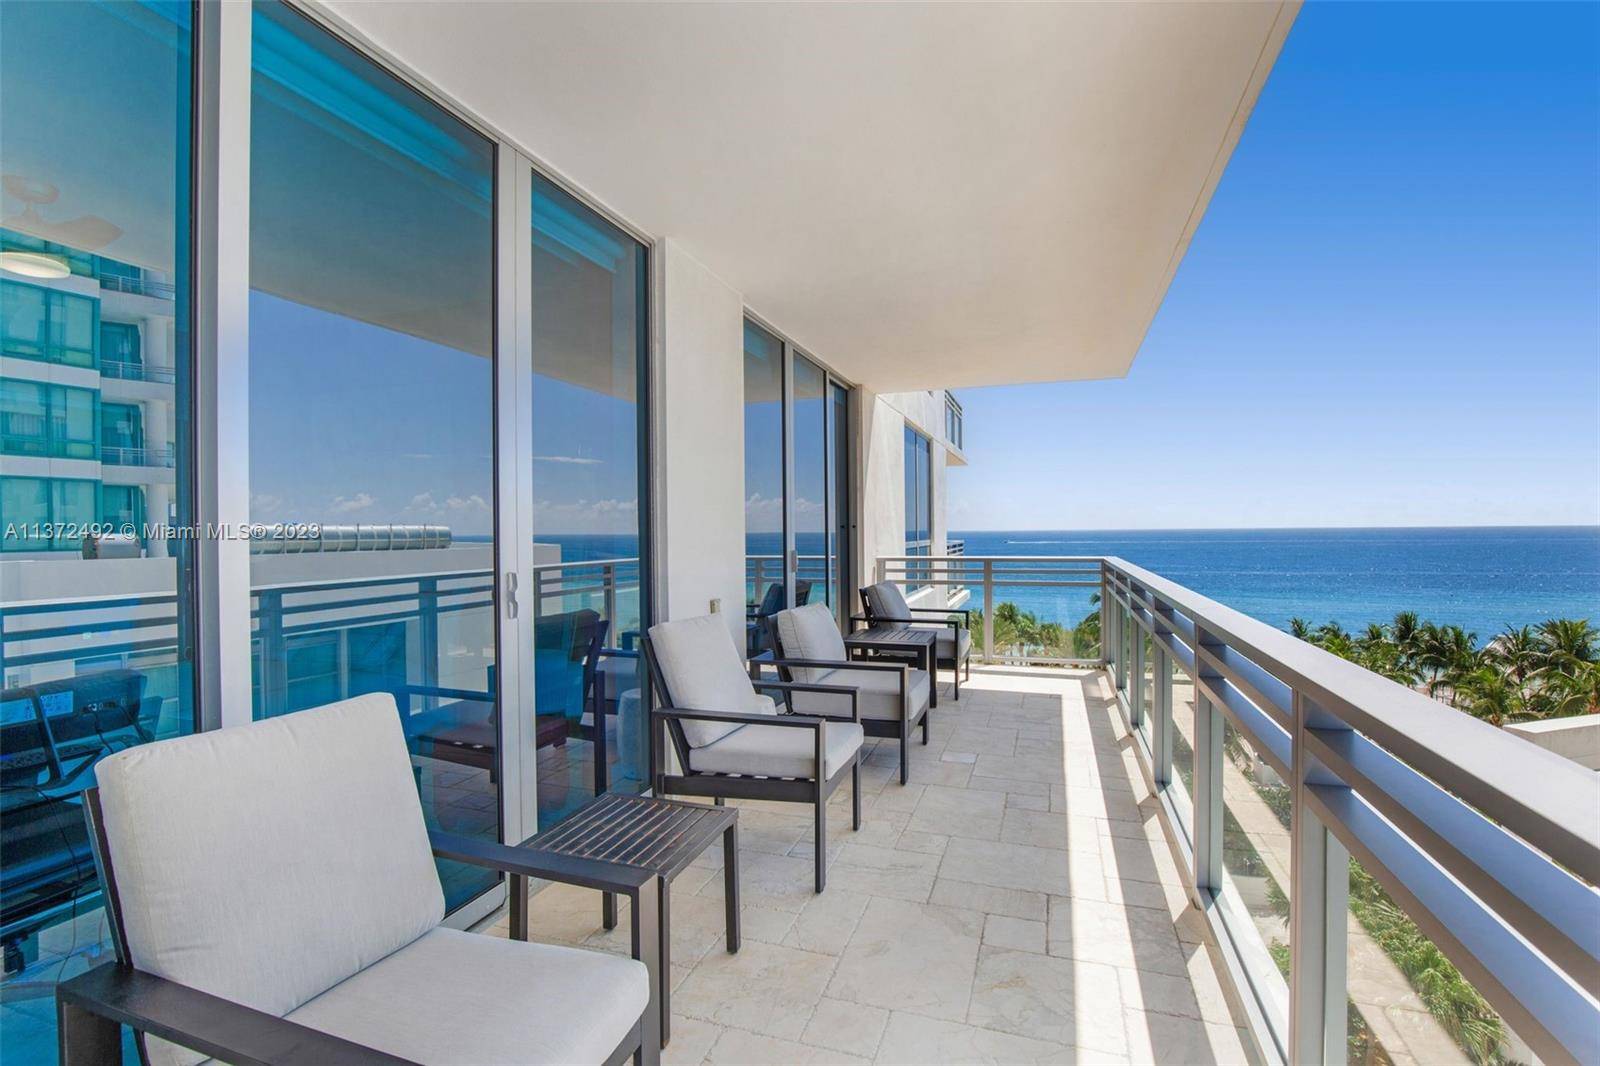 Welcome home to this highly sought after rarely available southeast corner home at the Diplomat Oceanfront Residences.